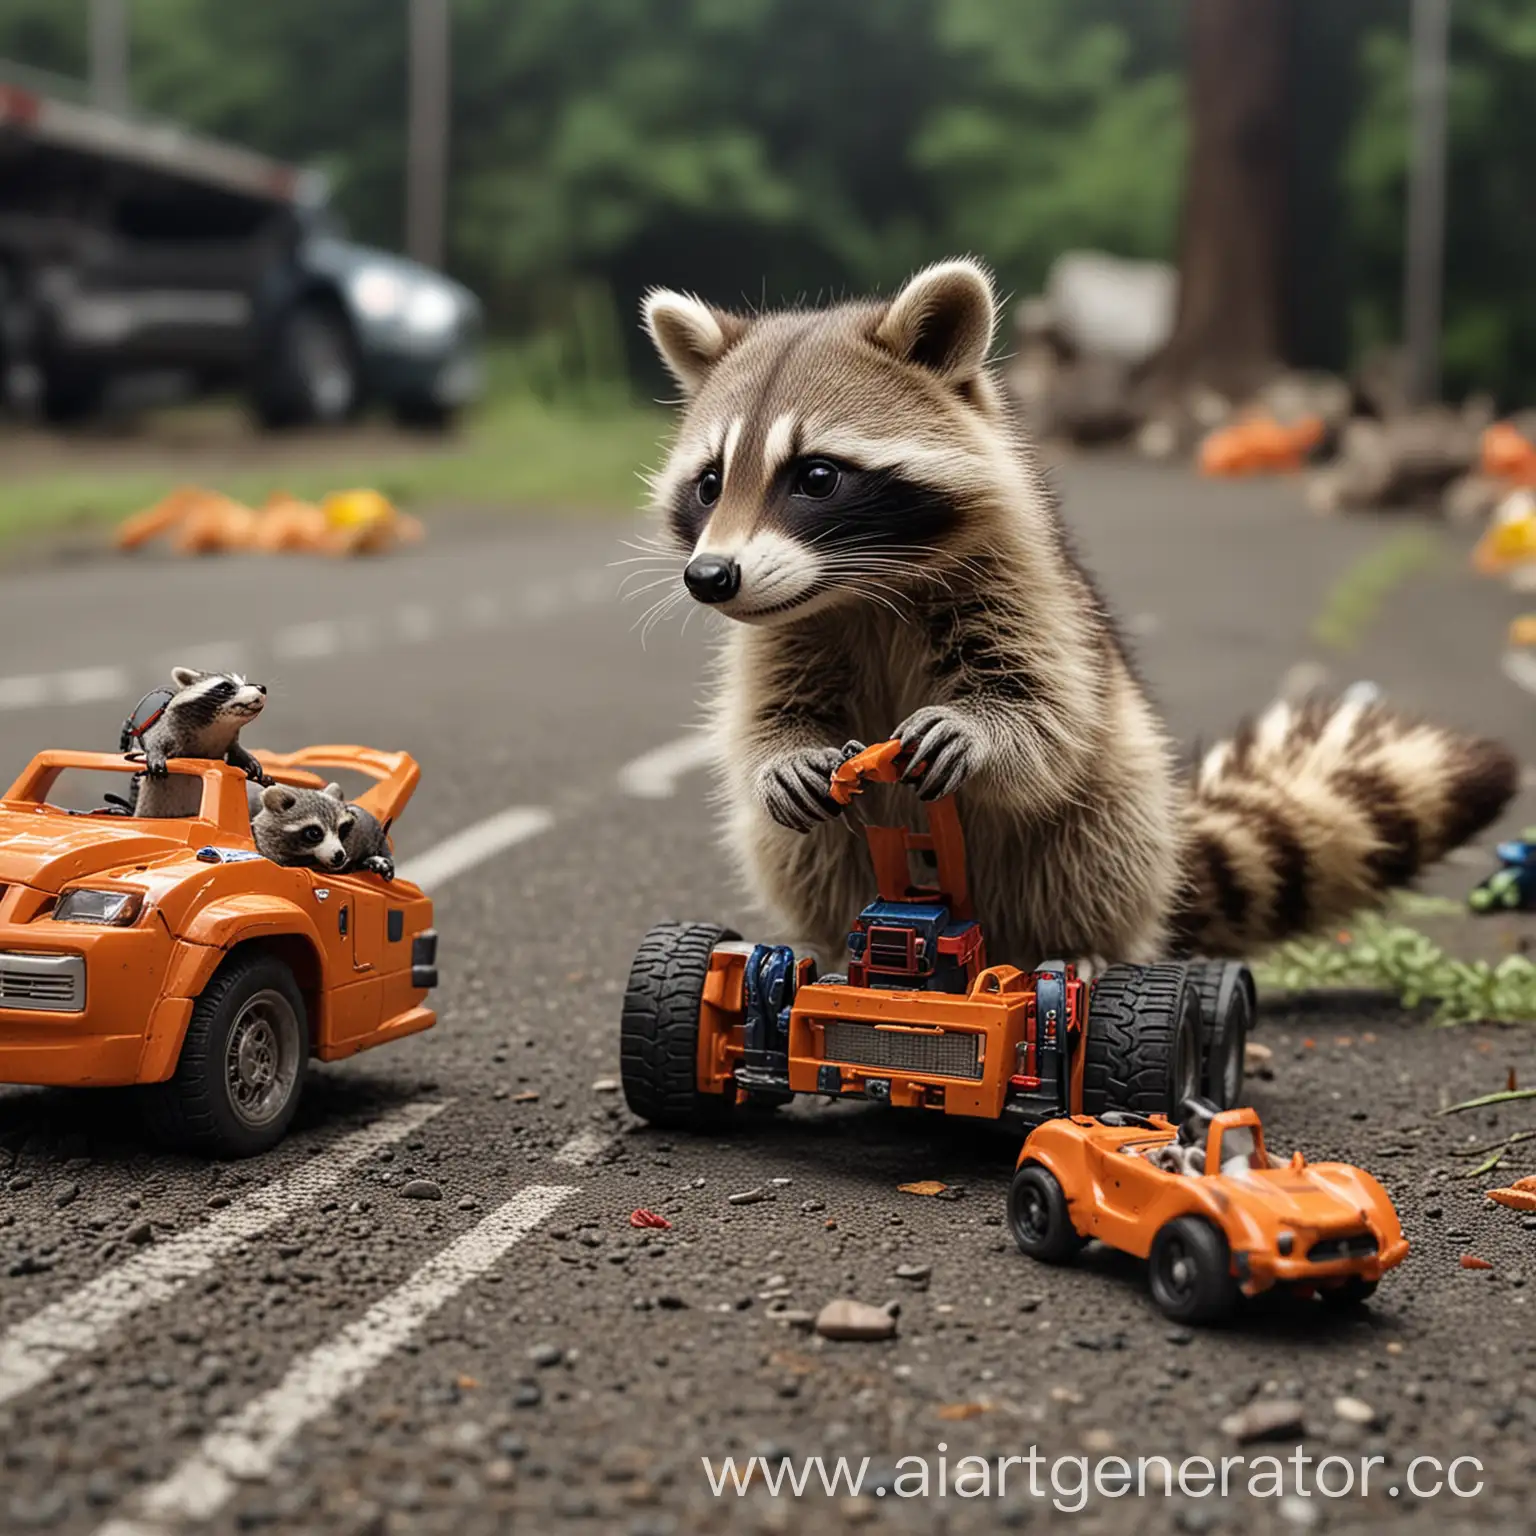 Raccoon-Cub-Playing-with-Toy-Dinosaurs-in-Japanese-Car-Race